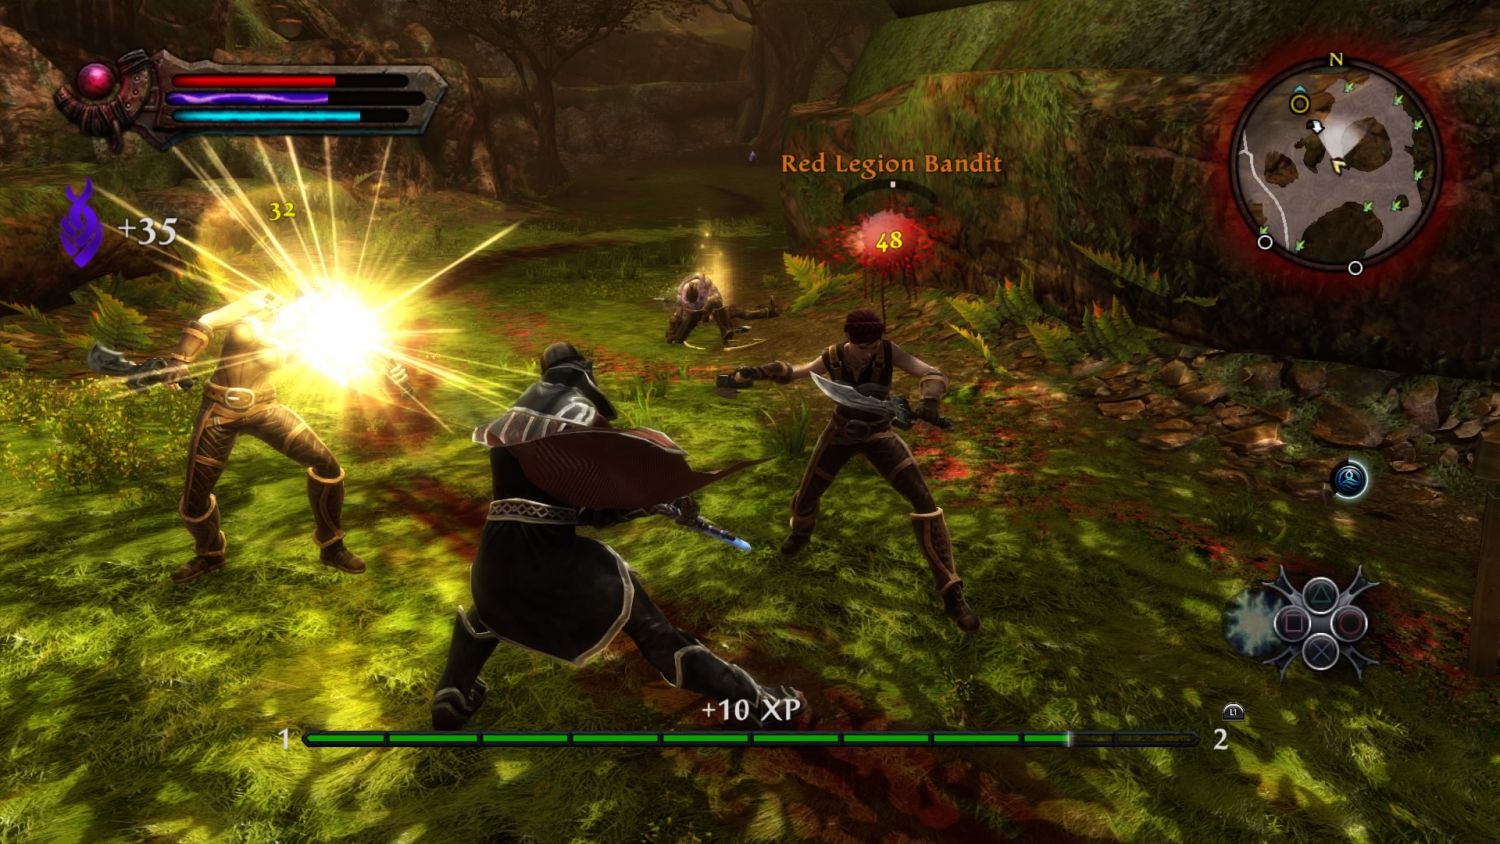 A player engages in combat in Kingdoms of Amalur.